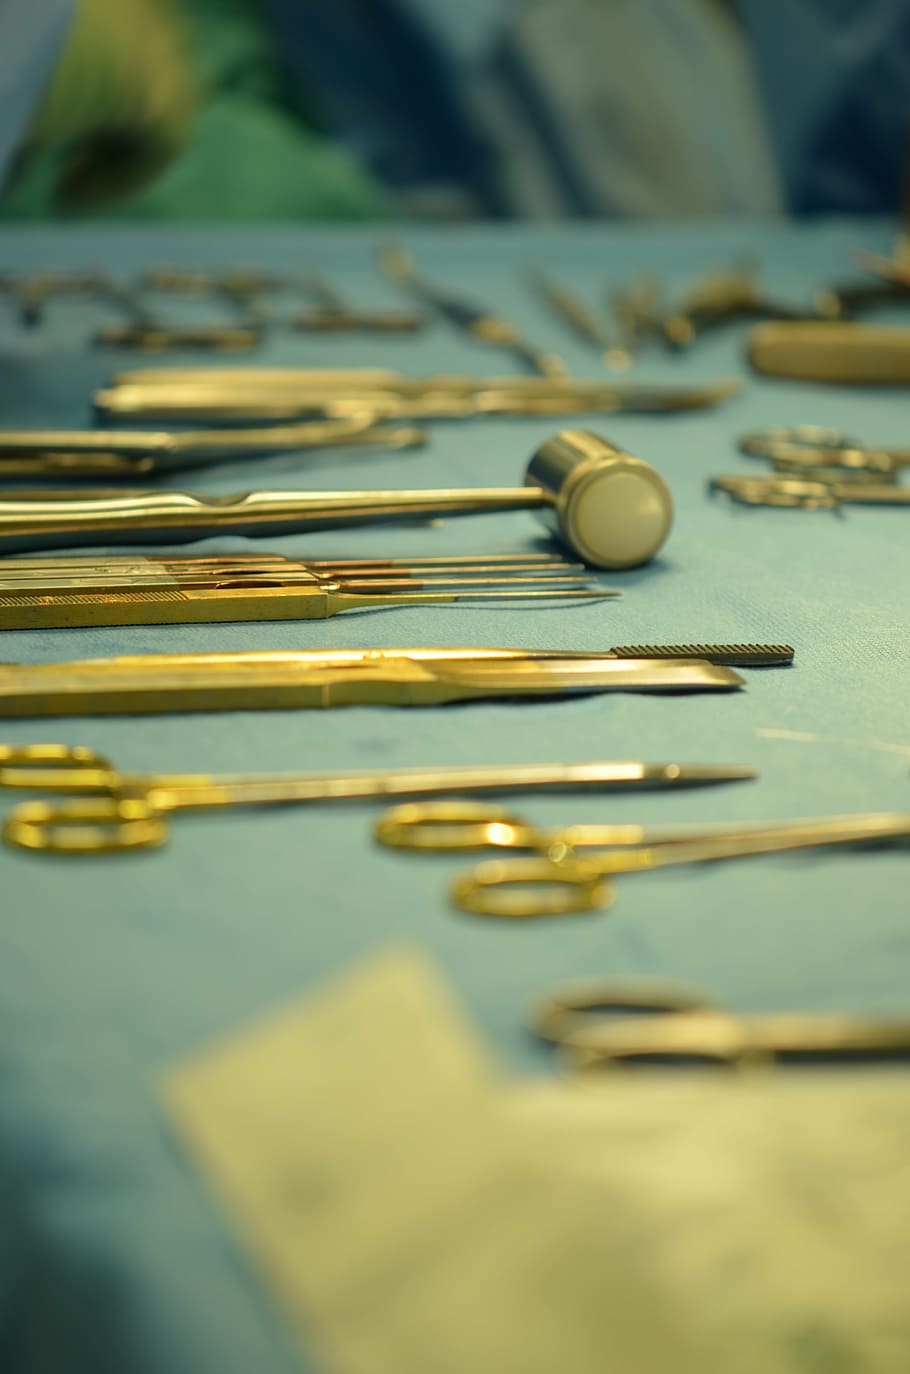 gold-colored scissor lot, table, doctor, surgeon, operation, instruments, medical, health, selective focus, close-up